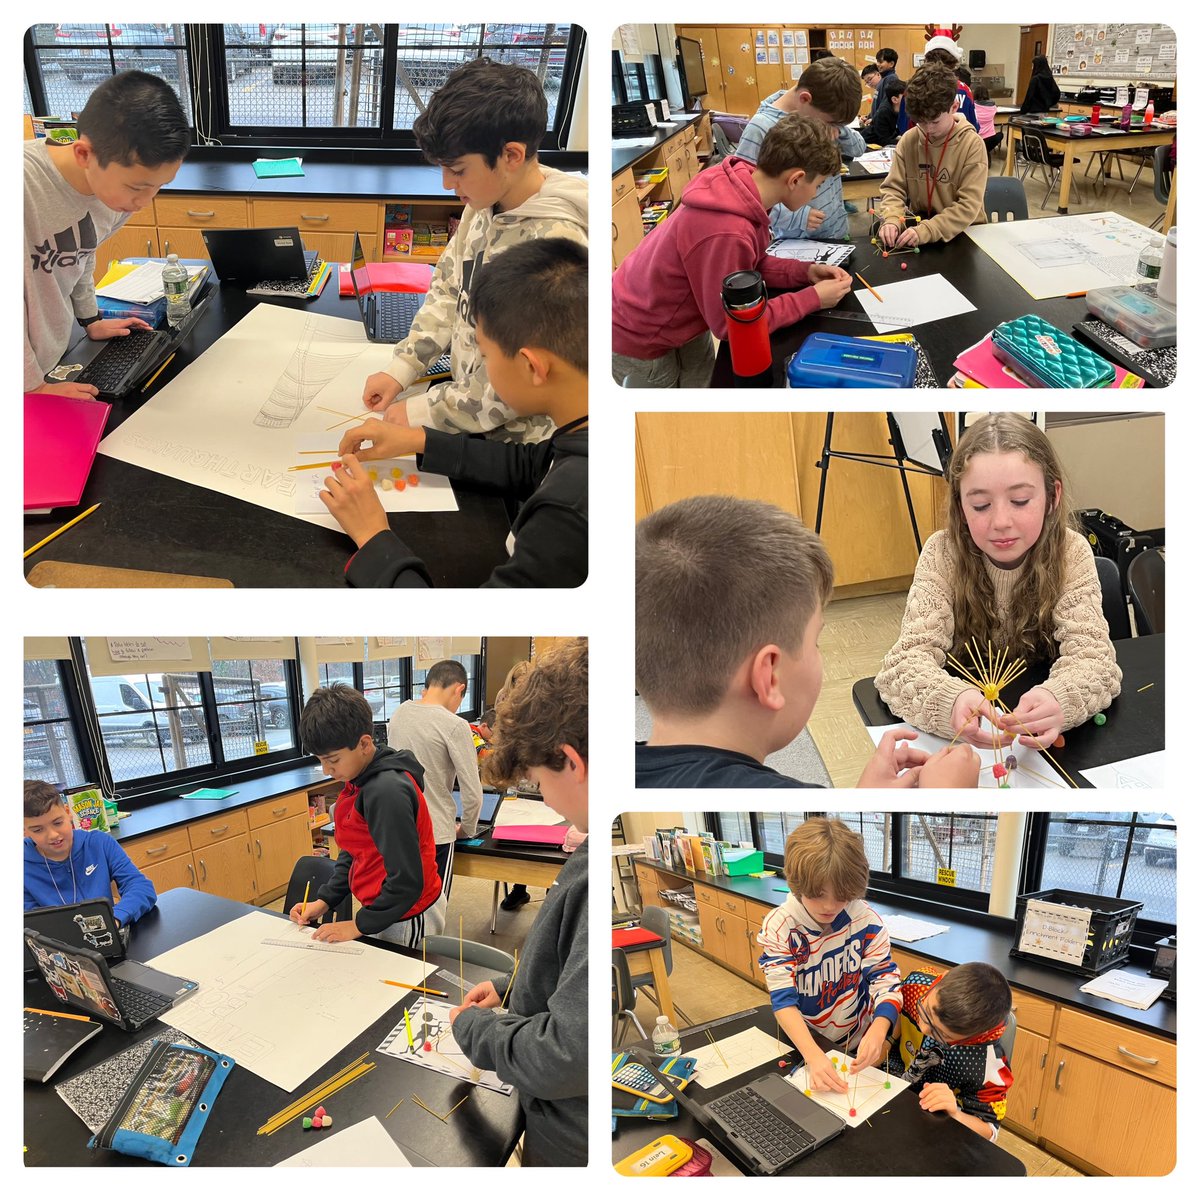 These incredible engineers are working hard to construct earthquake-resistant buildings using spaghetti sticks and gumdrops! @MissCSloane @MAPaceEWSD @WilletsRoadMS #ewlearns